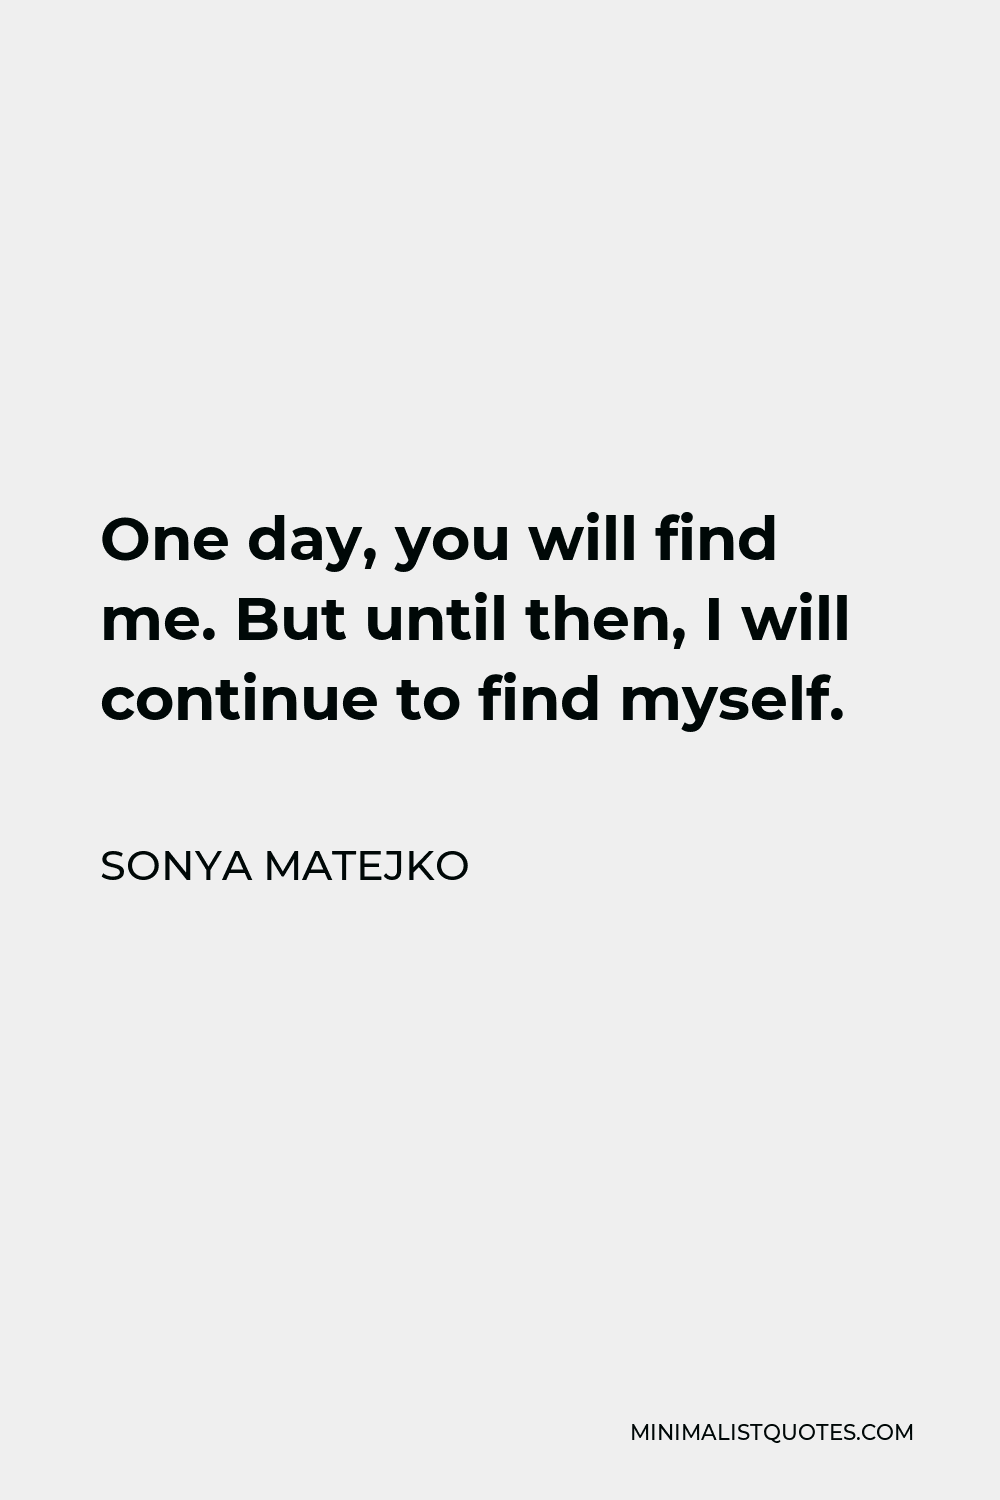 Sonya Matejko Quote - One day, you will find me. But until then, I will continue to find myself.